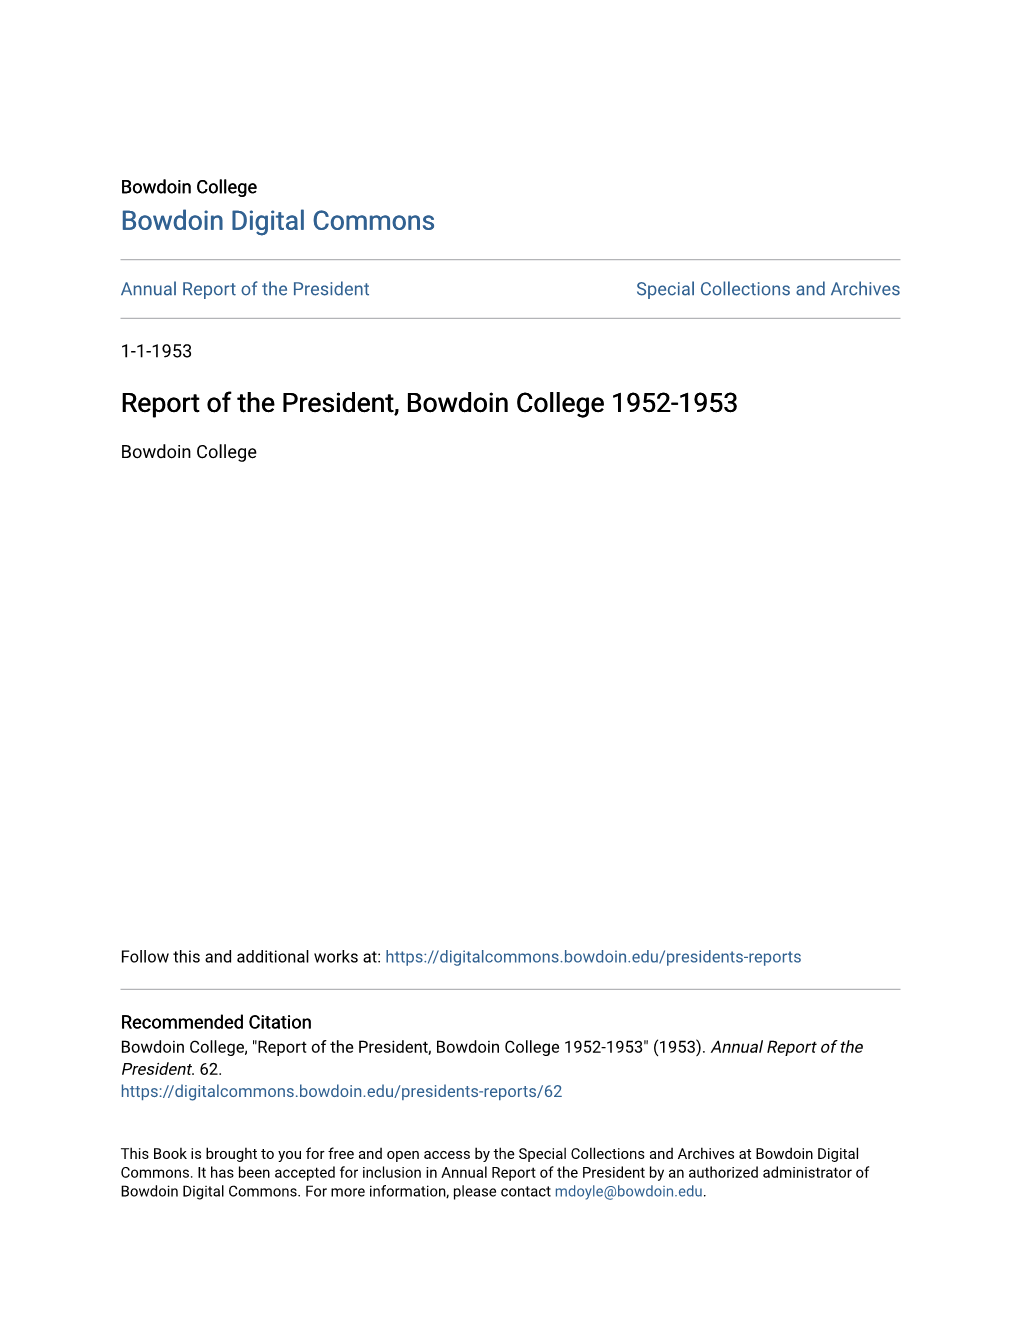 Report of the President, Bowdoin College 1952-1953